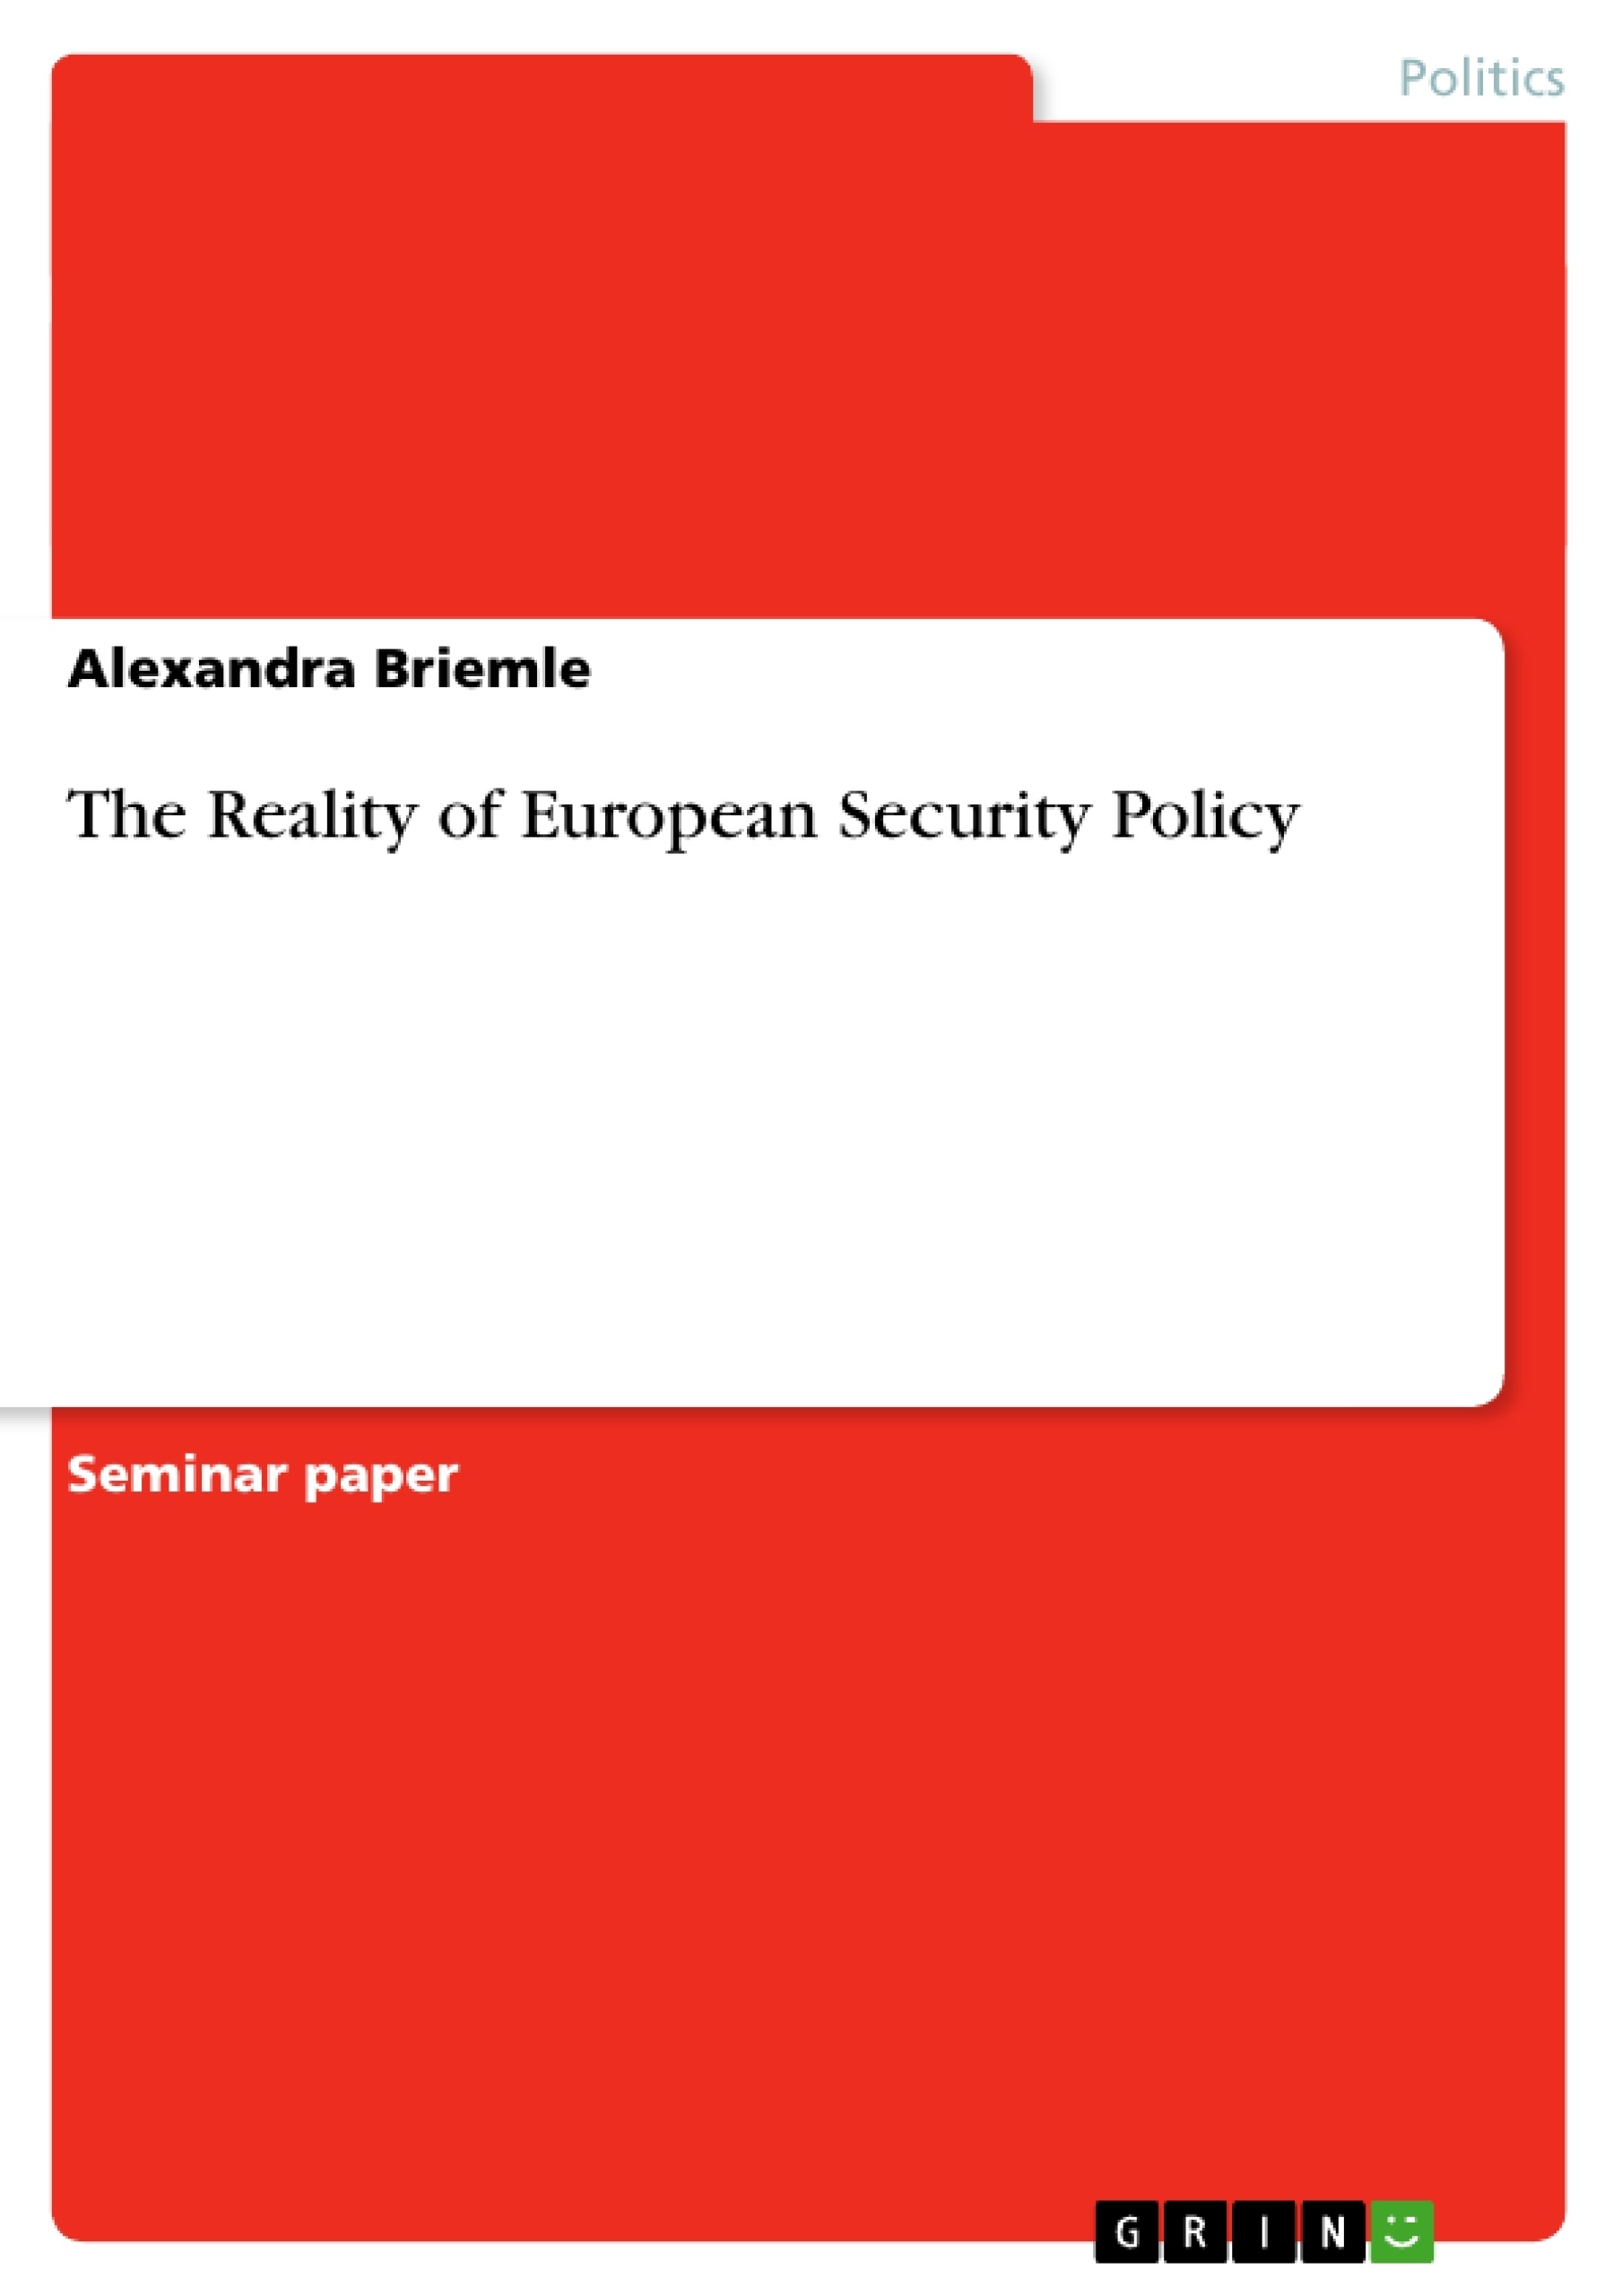 Title: The Reality of European Security Policy